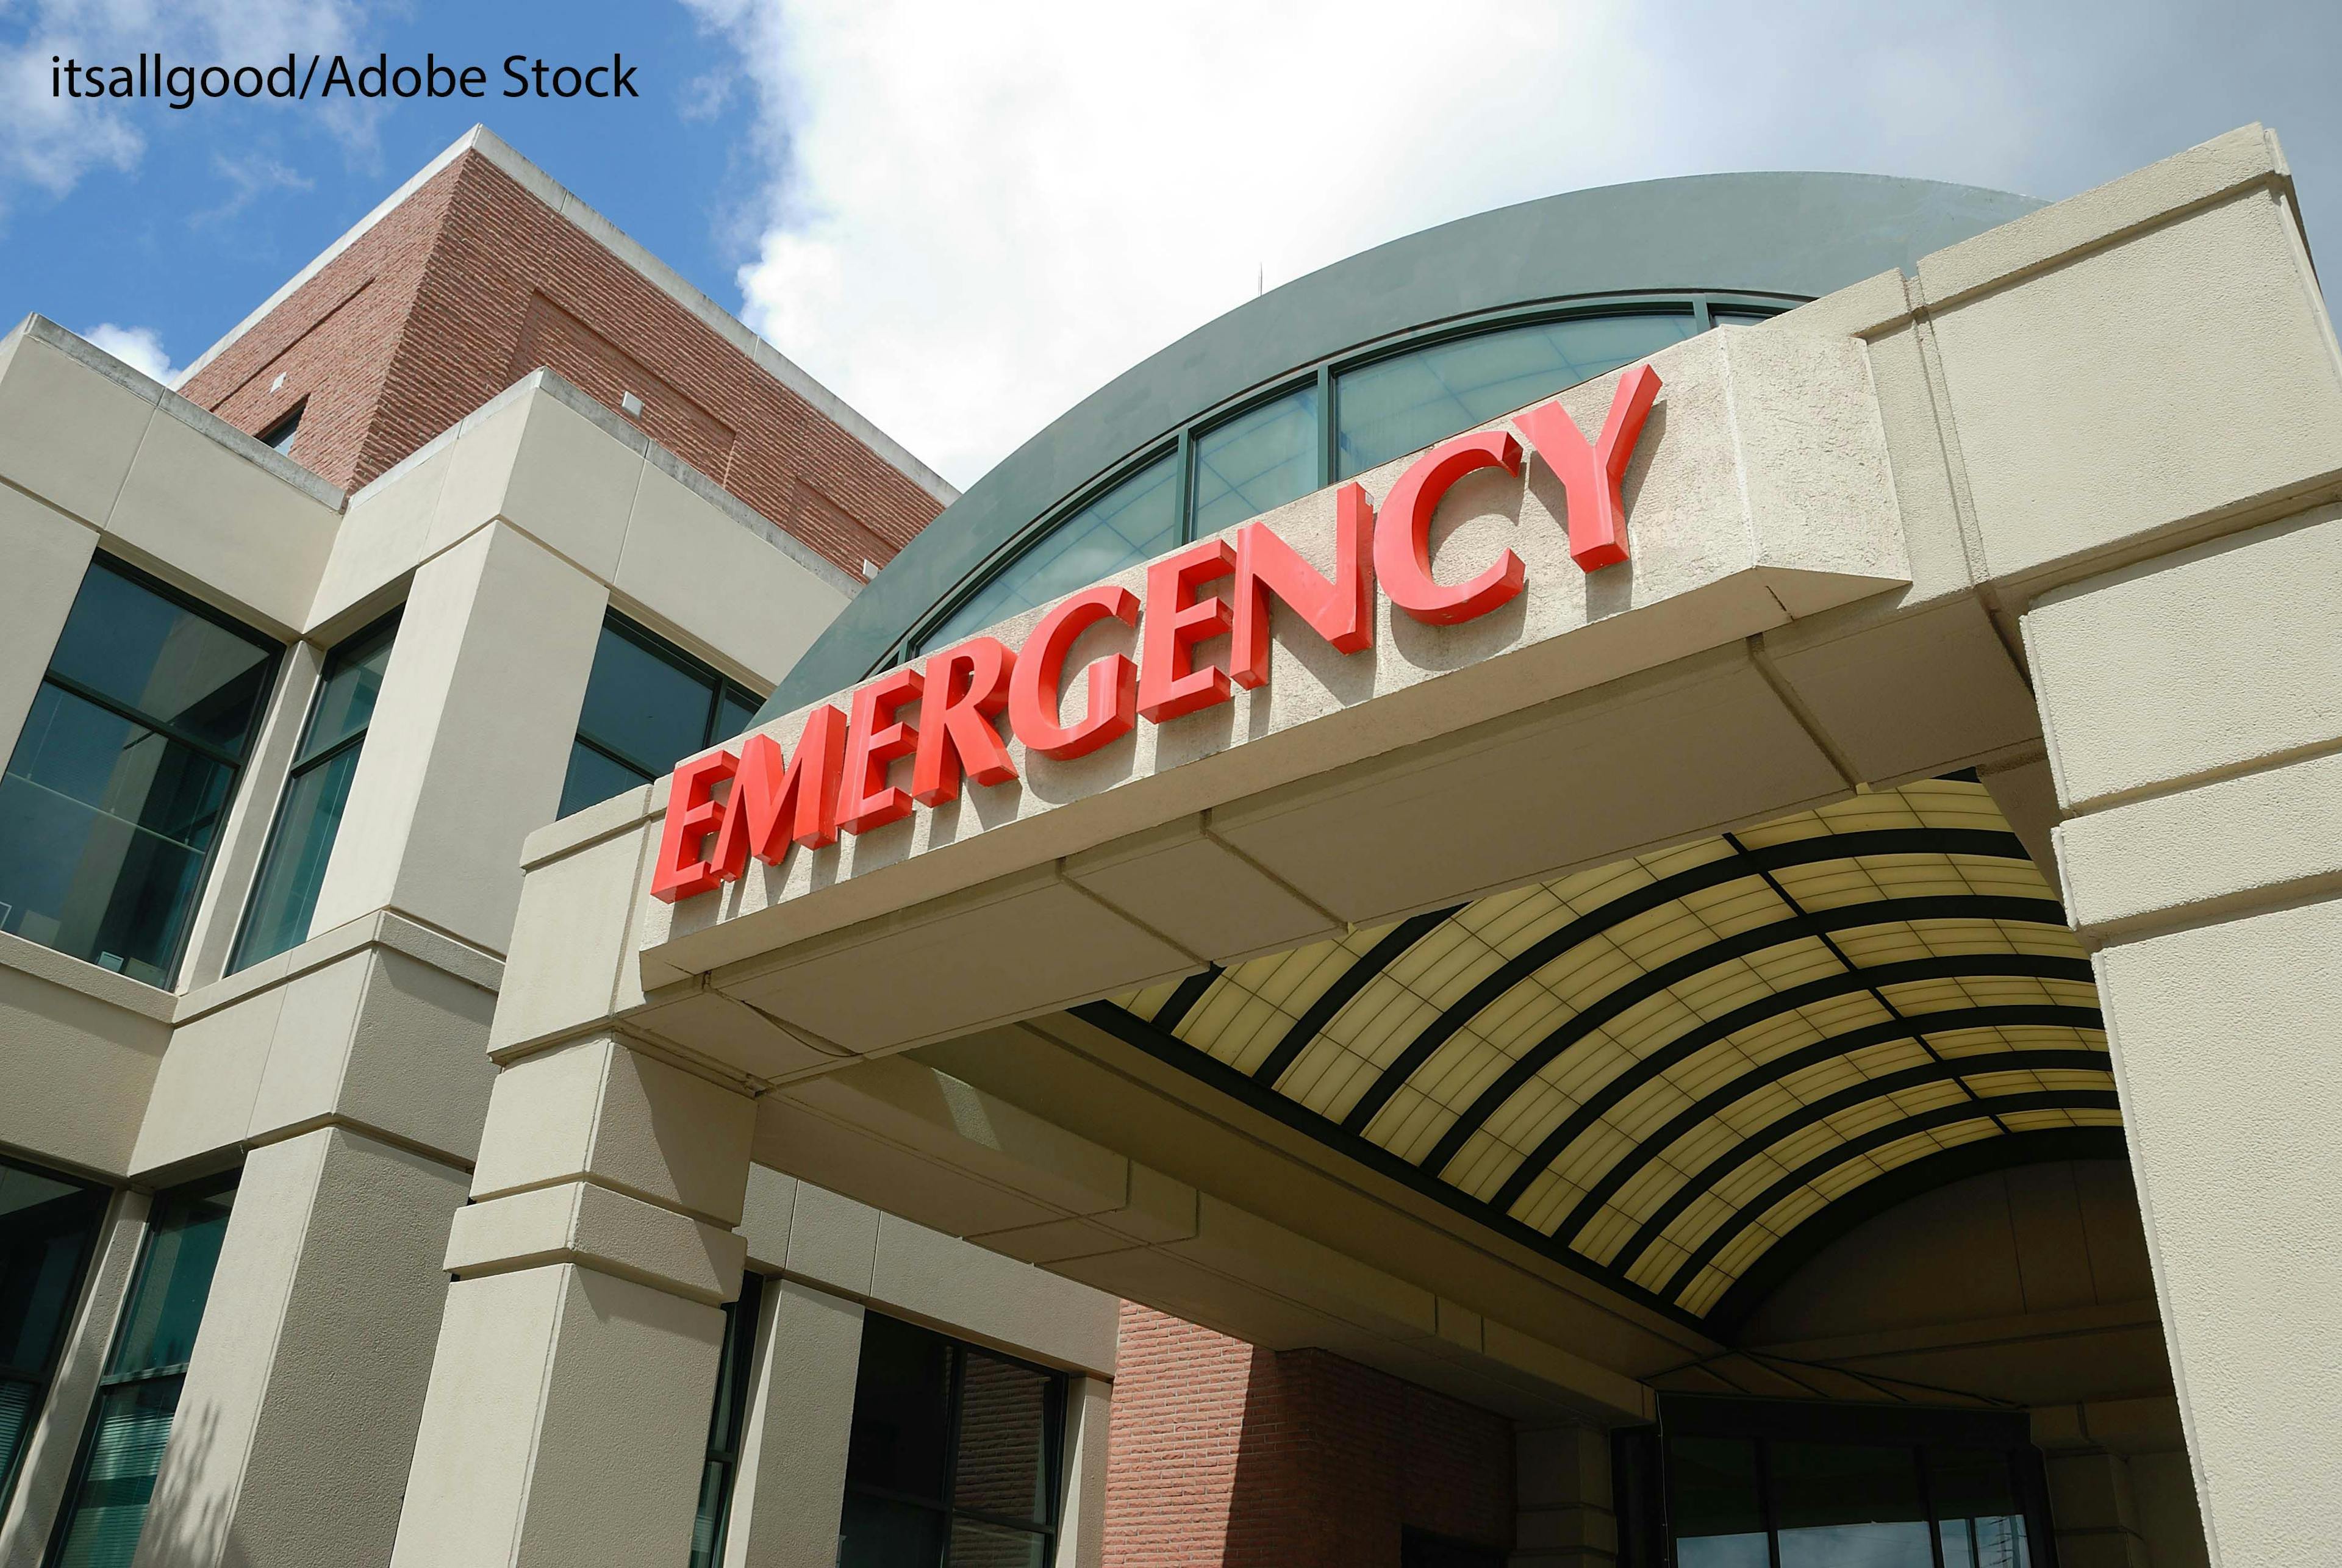 What Percentage of Cancer Diagnoses Are Made in the Emergency Department?